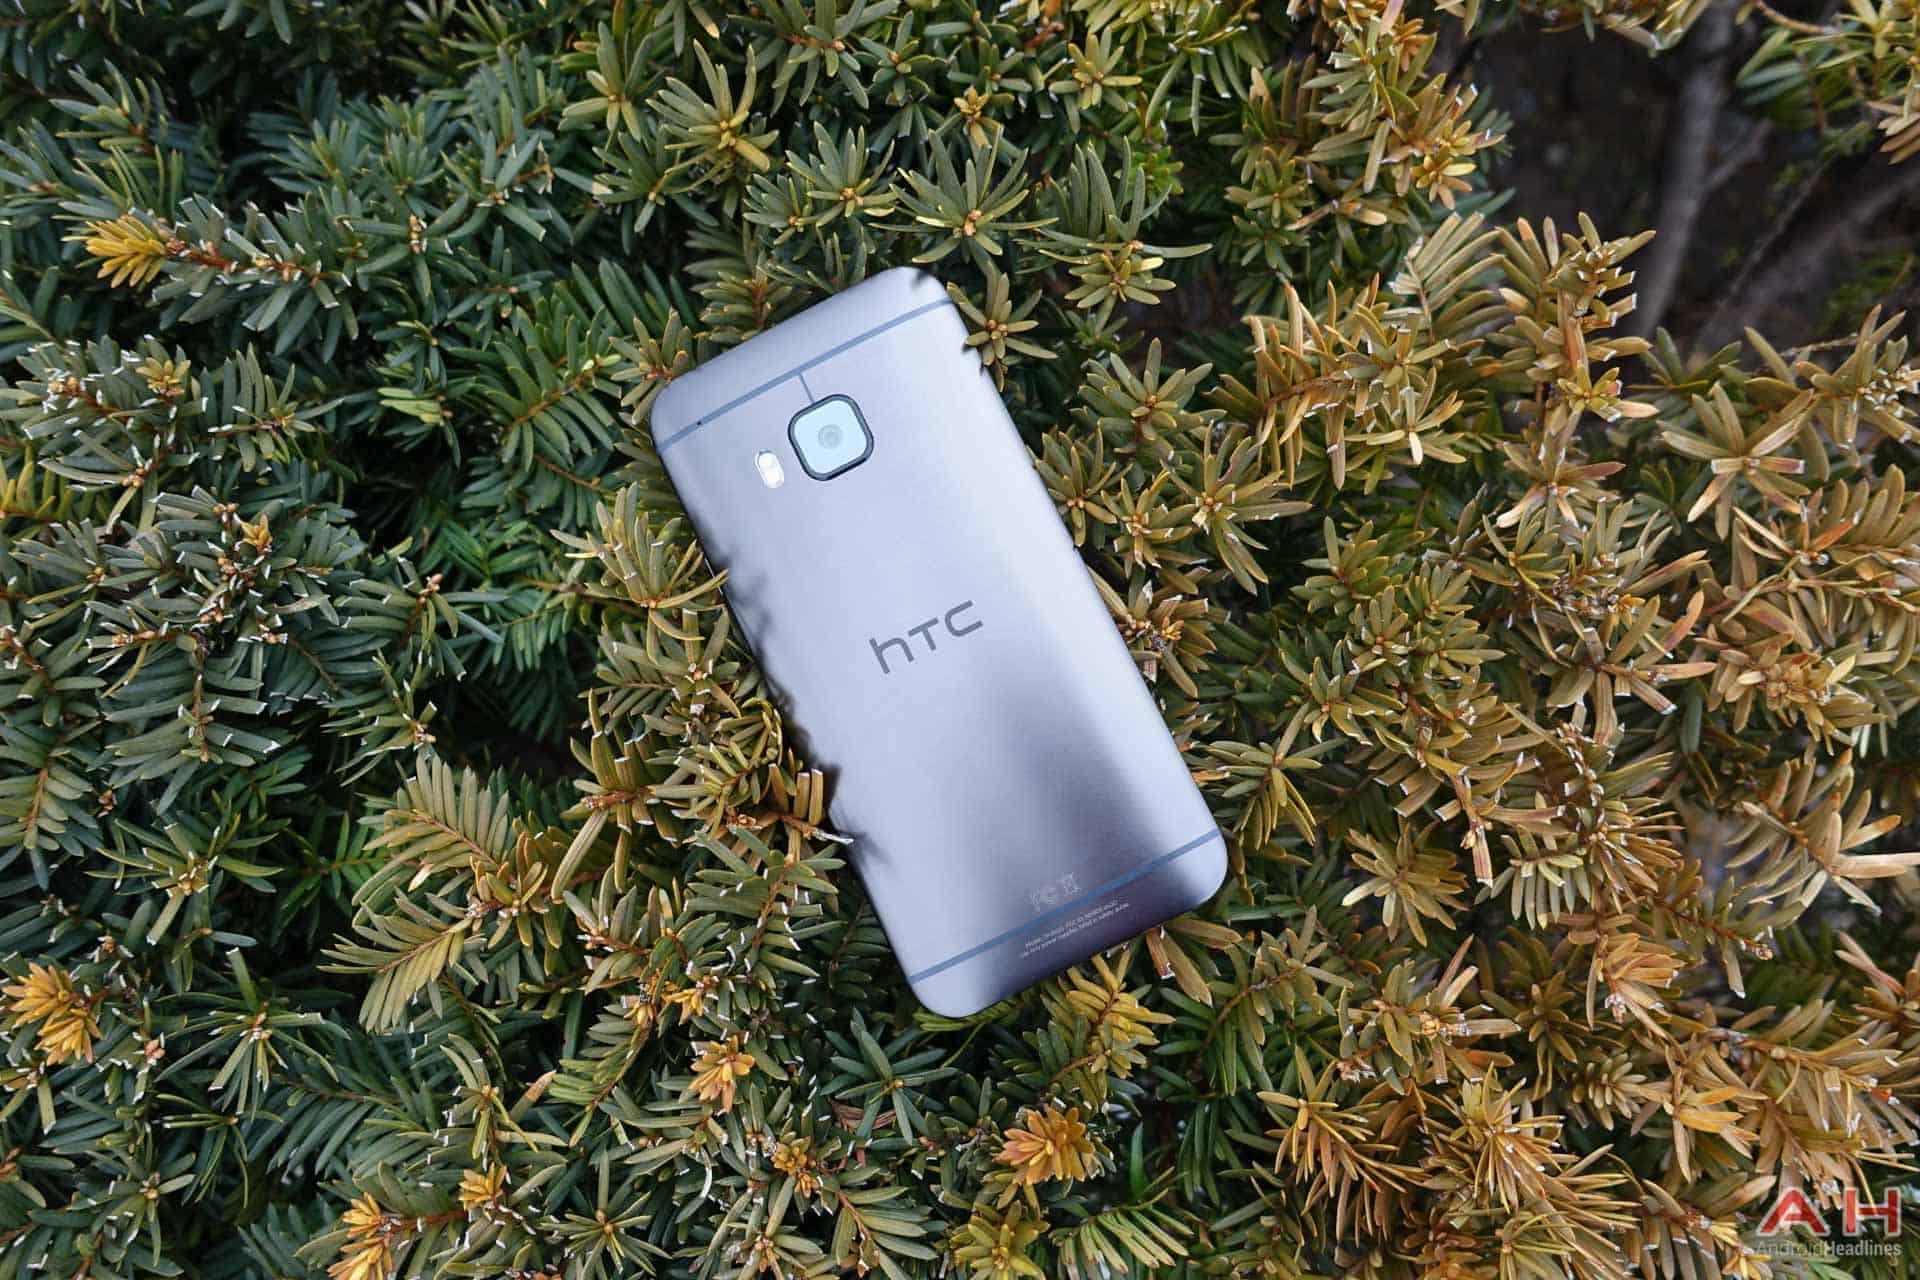 HTC-One-M9-Review-AH-57